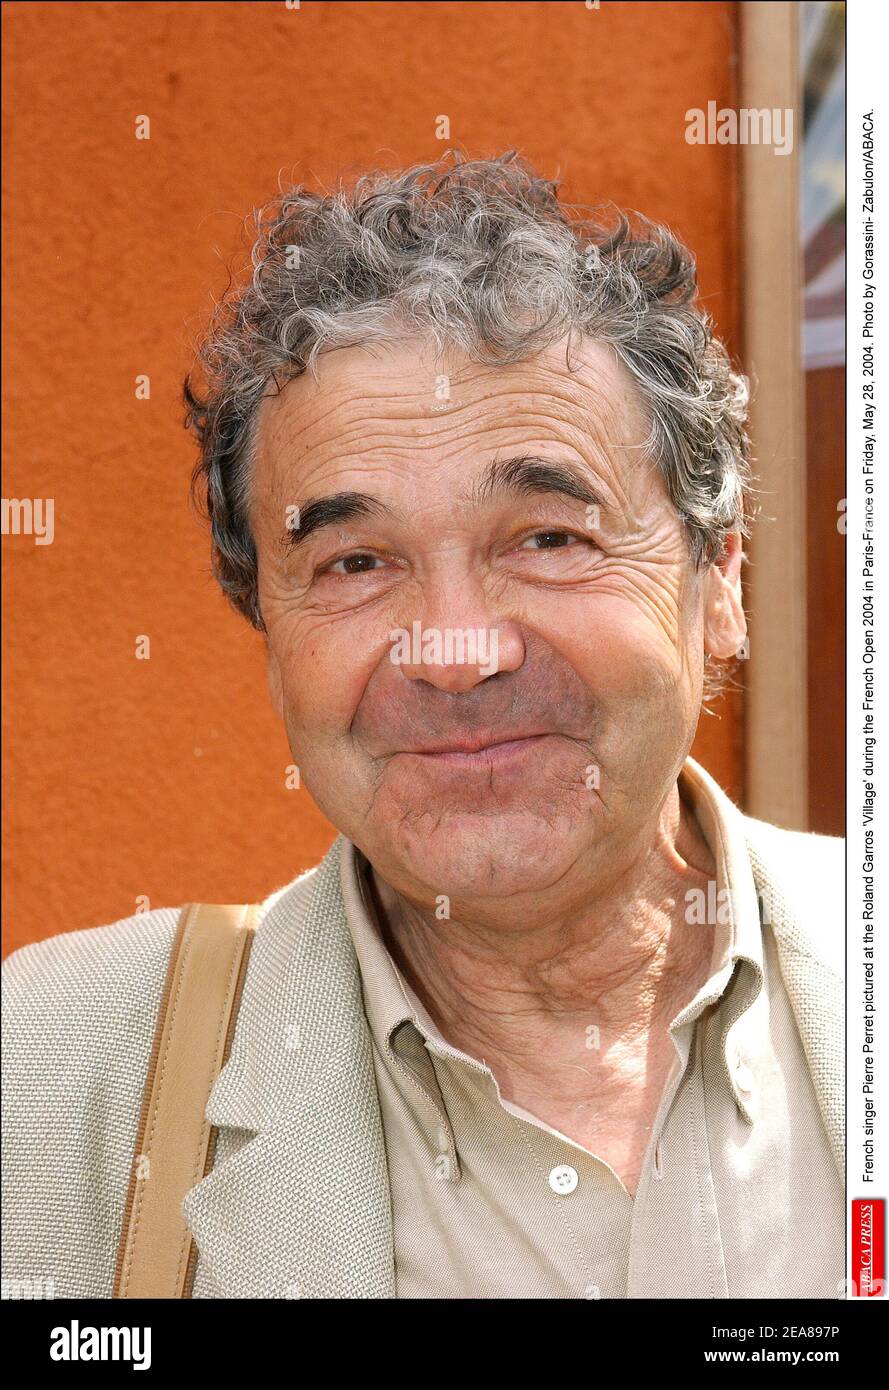 Pierre Perret High Resolution Stock Photography and Images - Alamy